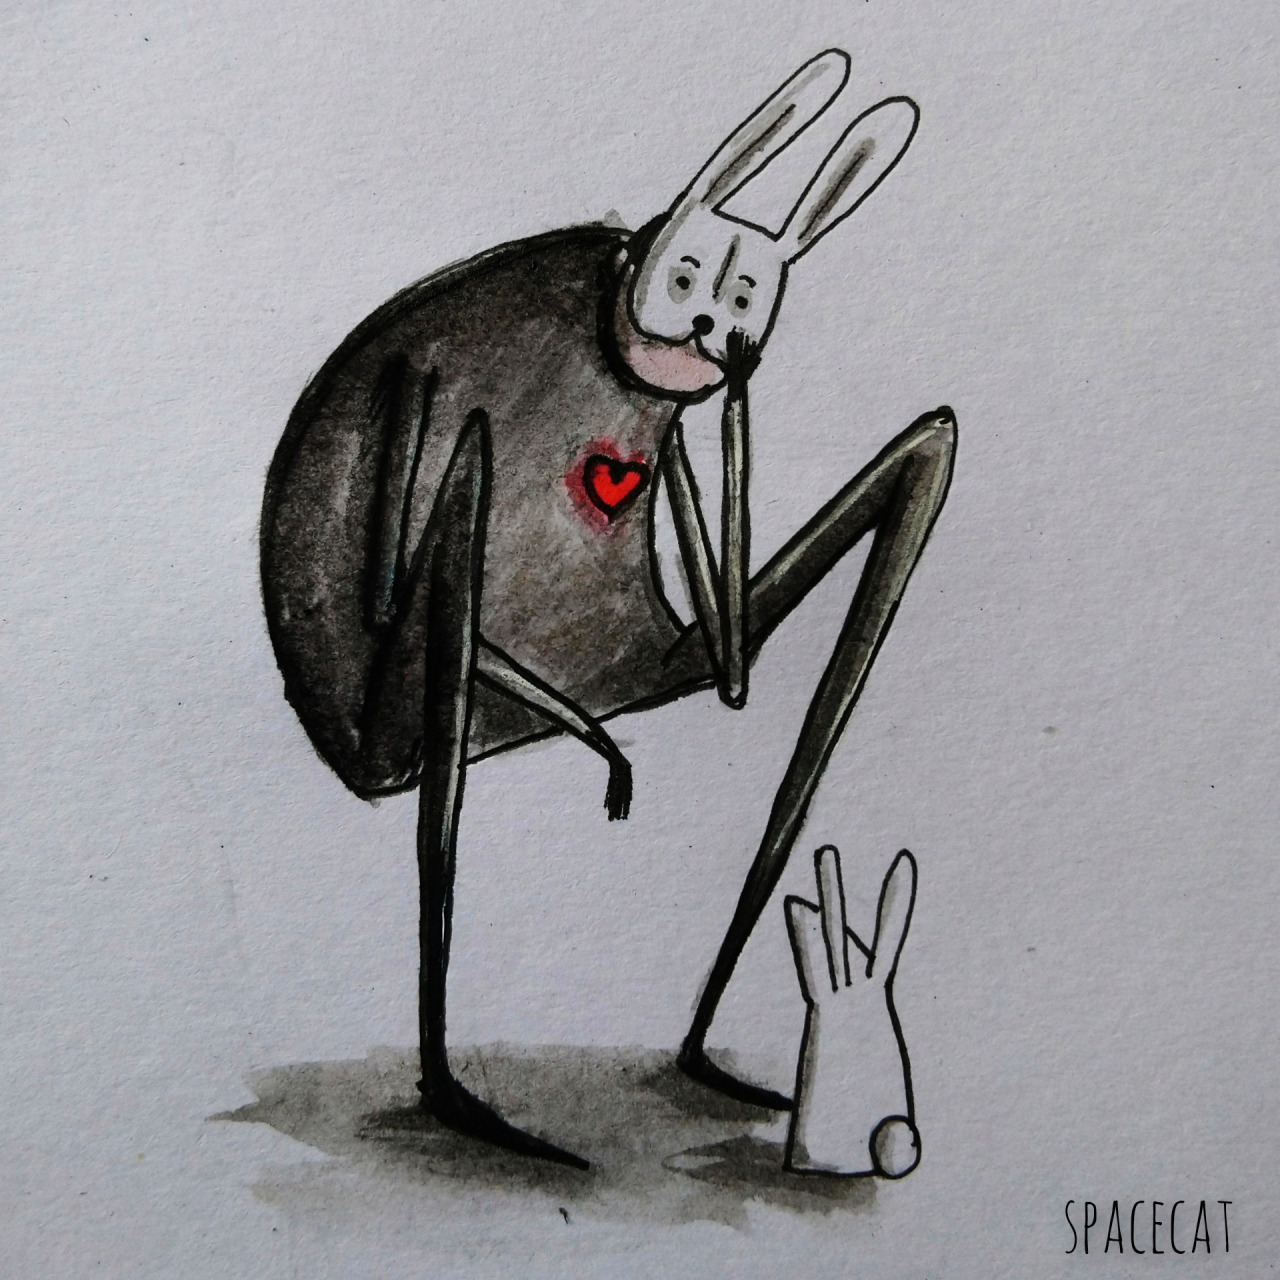 A quick sketch from 2019A7, ink, watercolour, 2019My Instagram & Deviant art #bunny#rabbit#original character#character design#sketchbook#sketching#illustration#mask#cute#art #Ink on paper #kawaii#og character#drawing#traditional media#sketch#messy